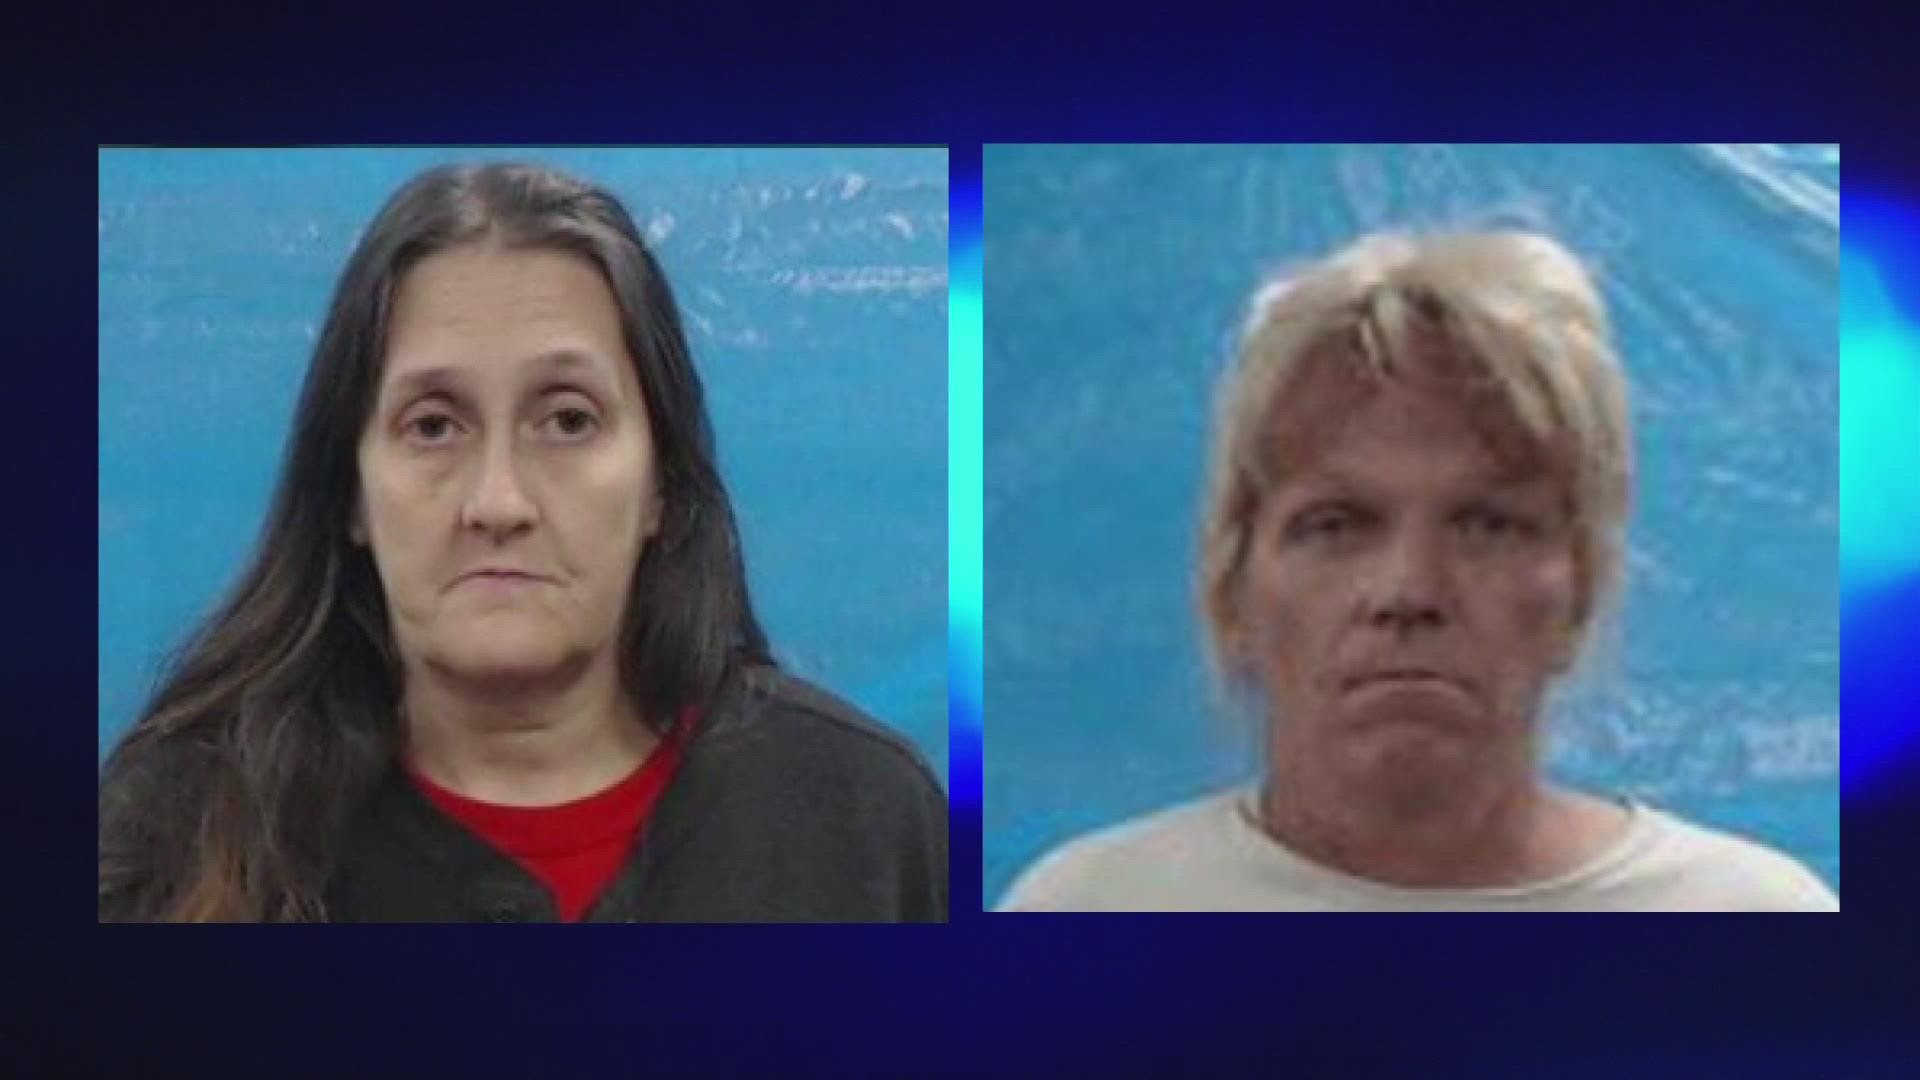 DA Husband and wife convicted of murder after 72-year-old mother starved to death wbir